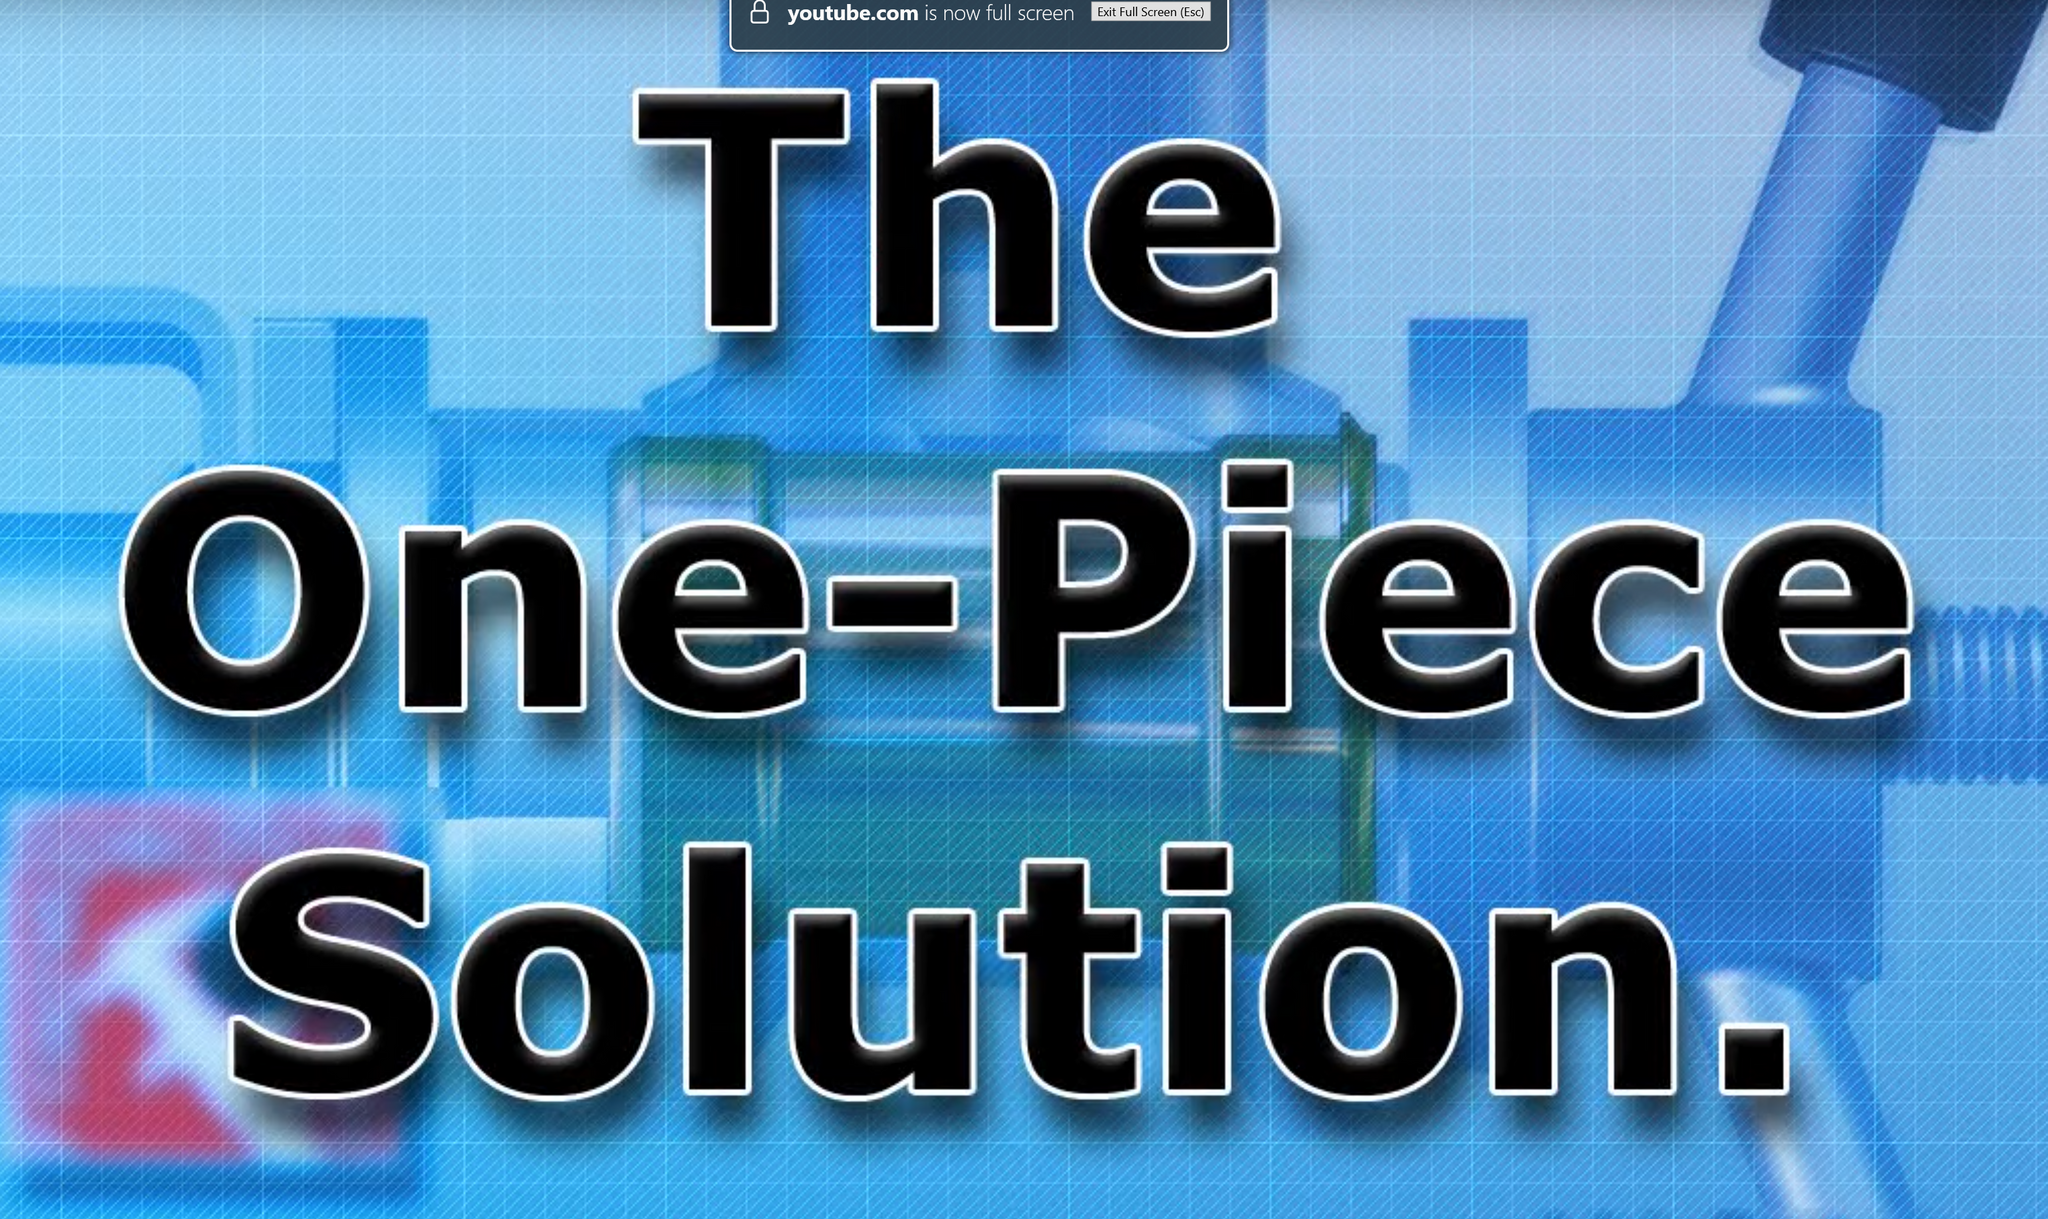 One Piece BB solution tech page vid